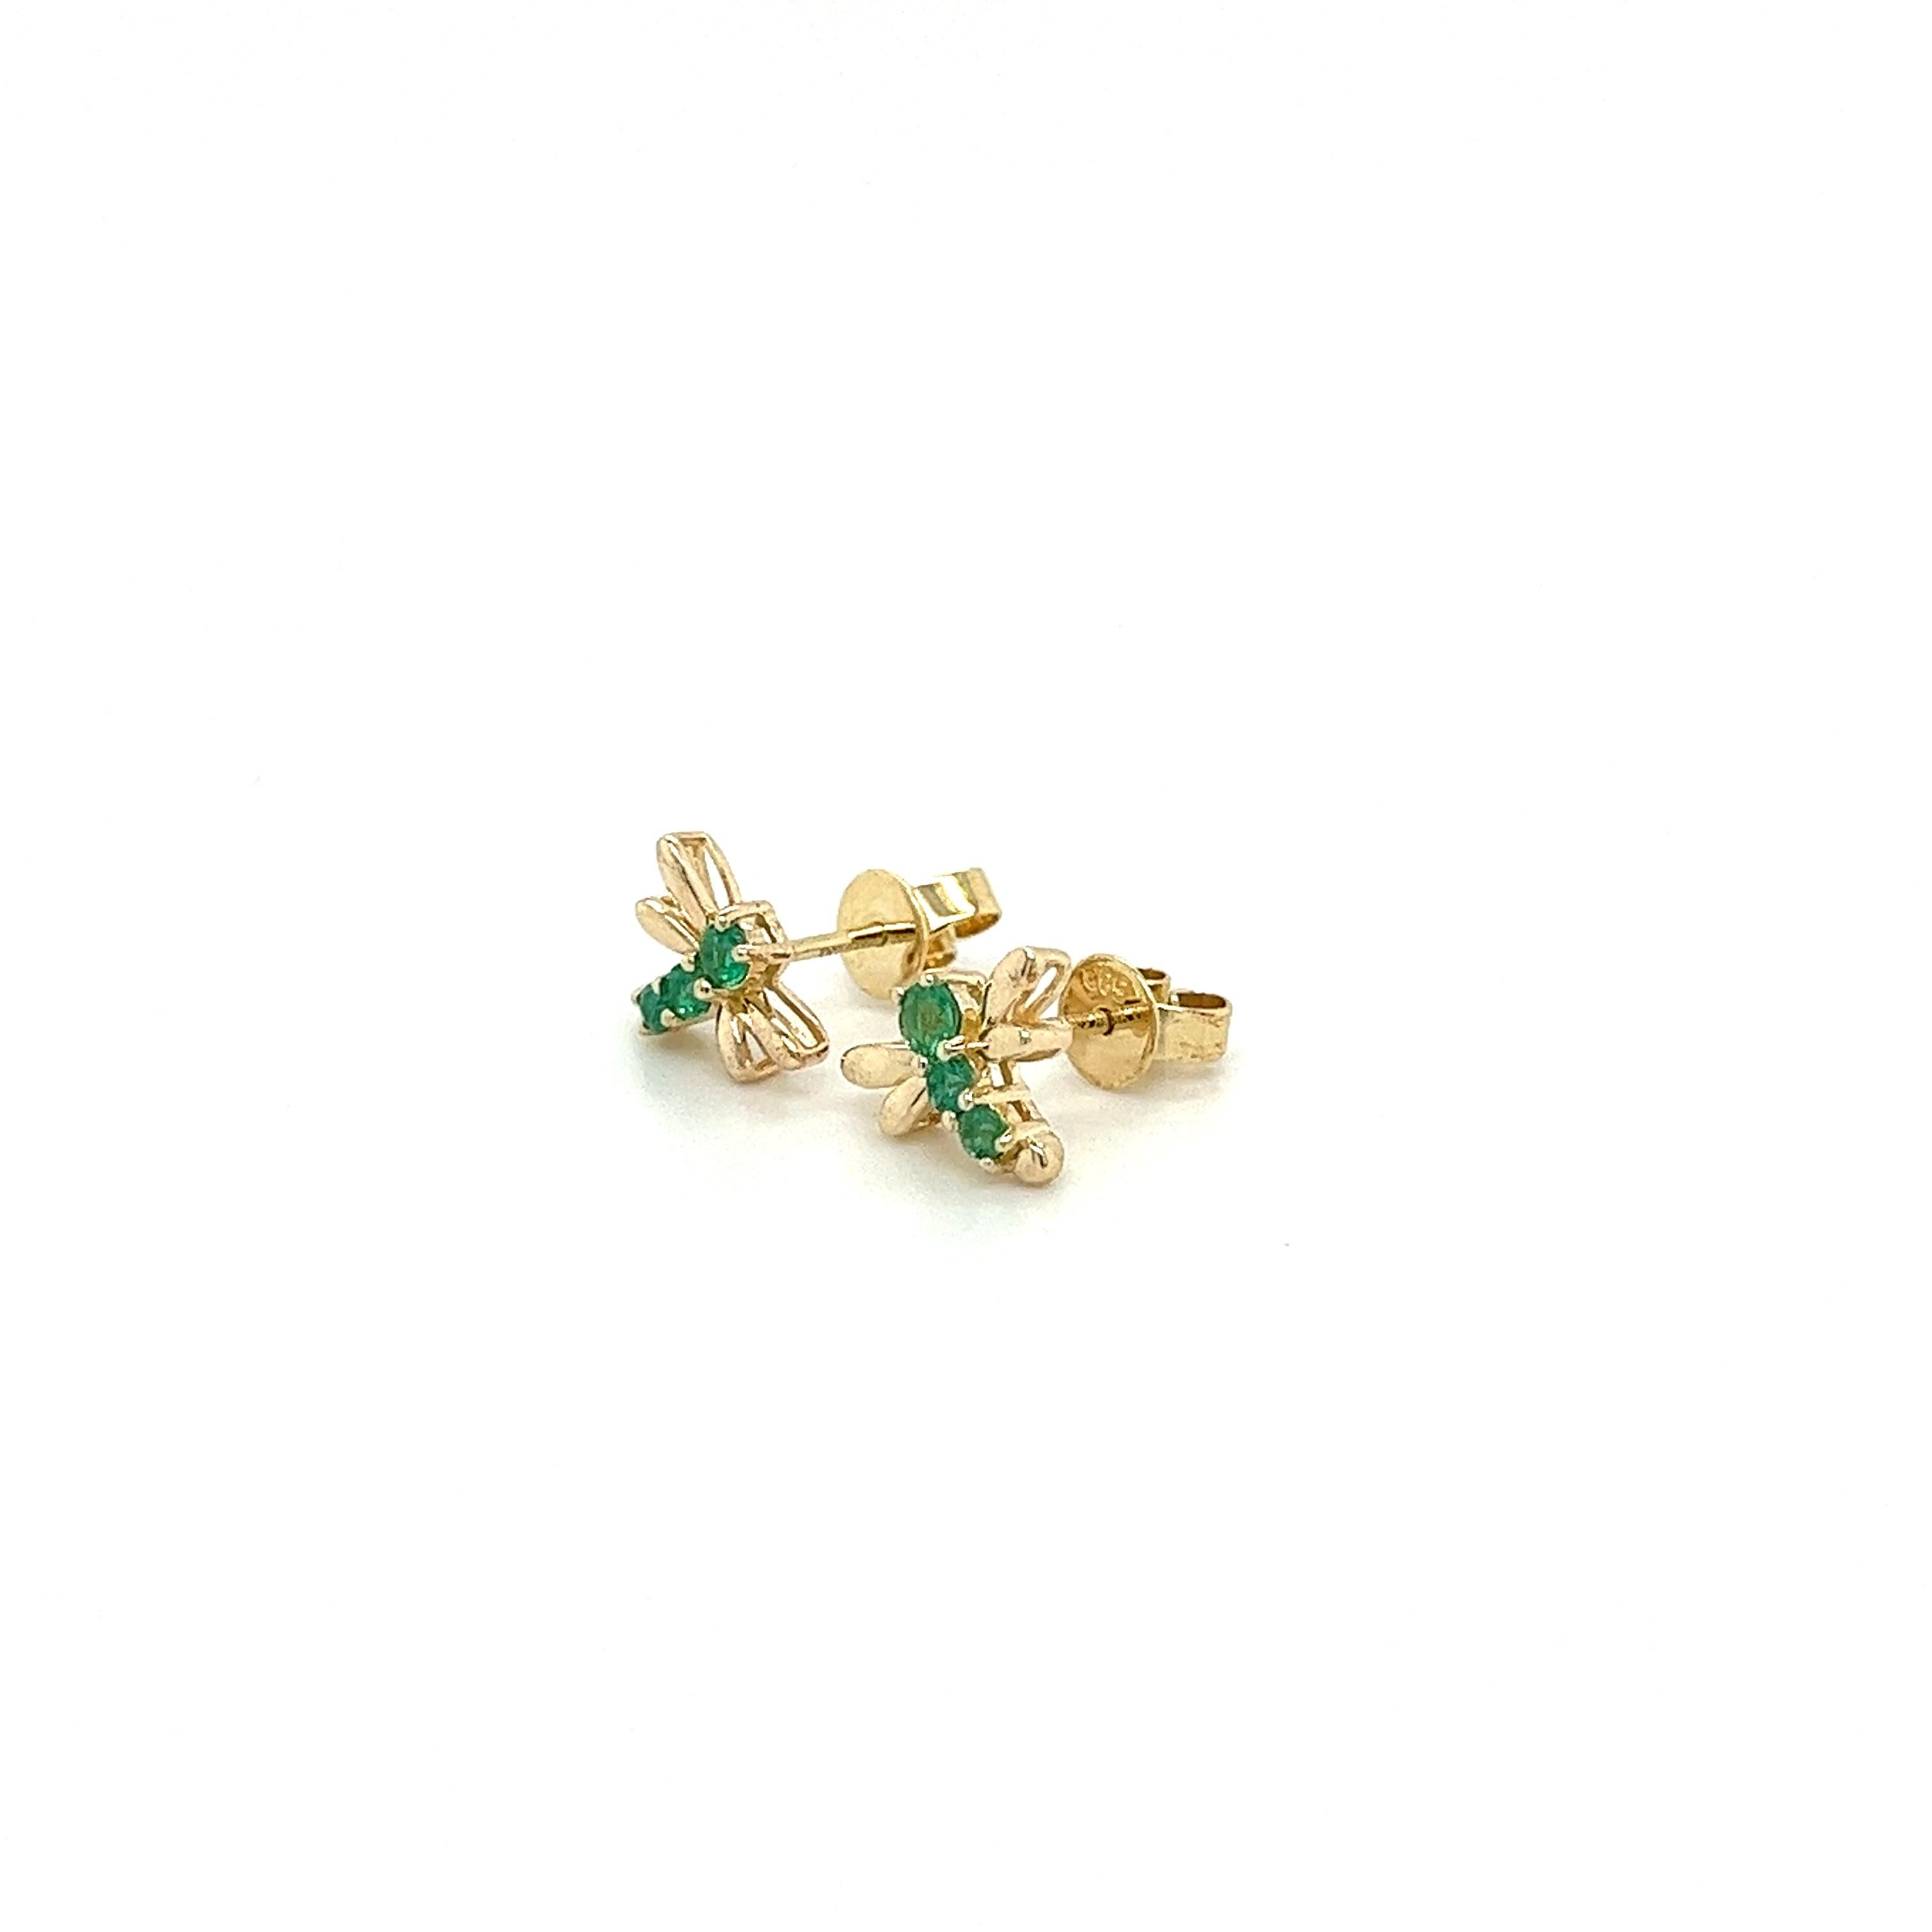 Natural emerald Dragonfly stud earrings set in 14-karat solid gold. Safely mounted with a strong push-back closure and 2 tightness levels for additional flexibility and security. Carat weight and gold kt stamped. 

100% water-proof. Complete with